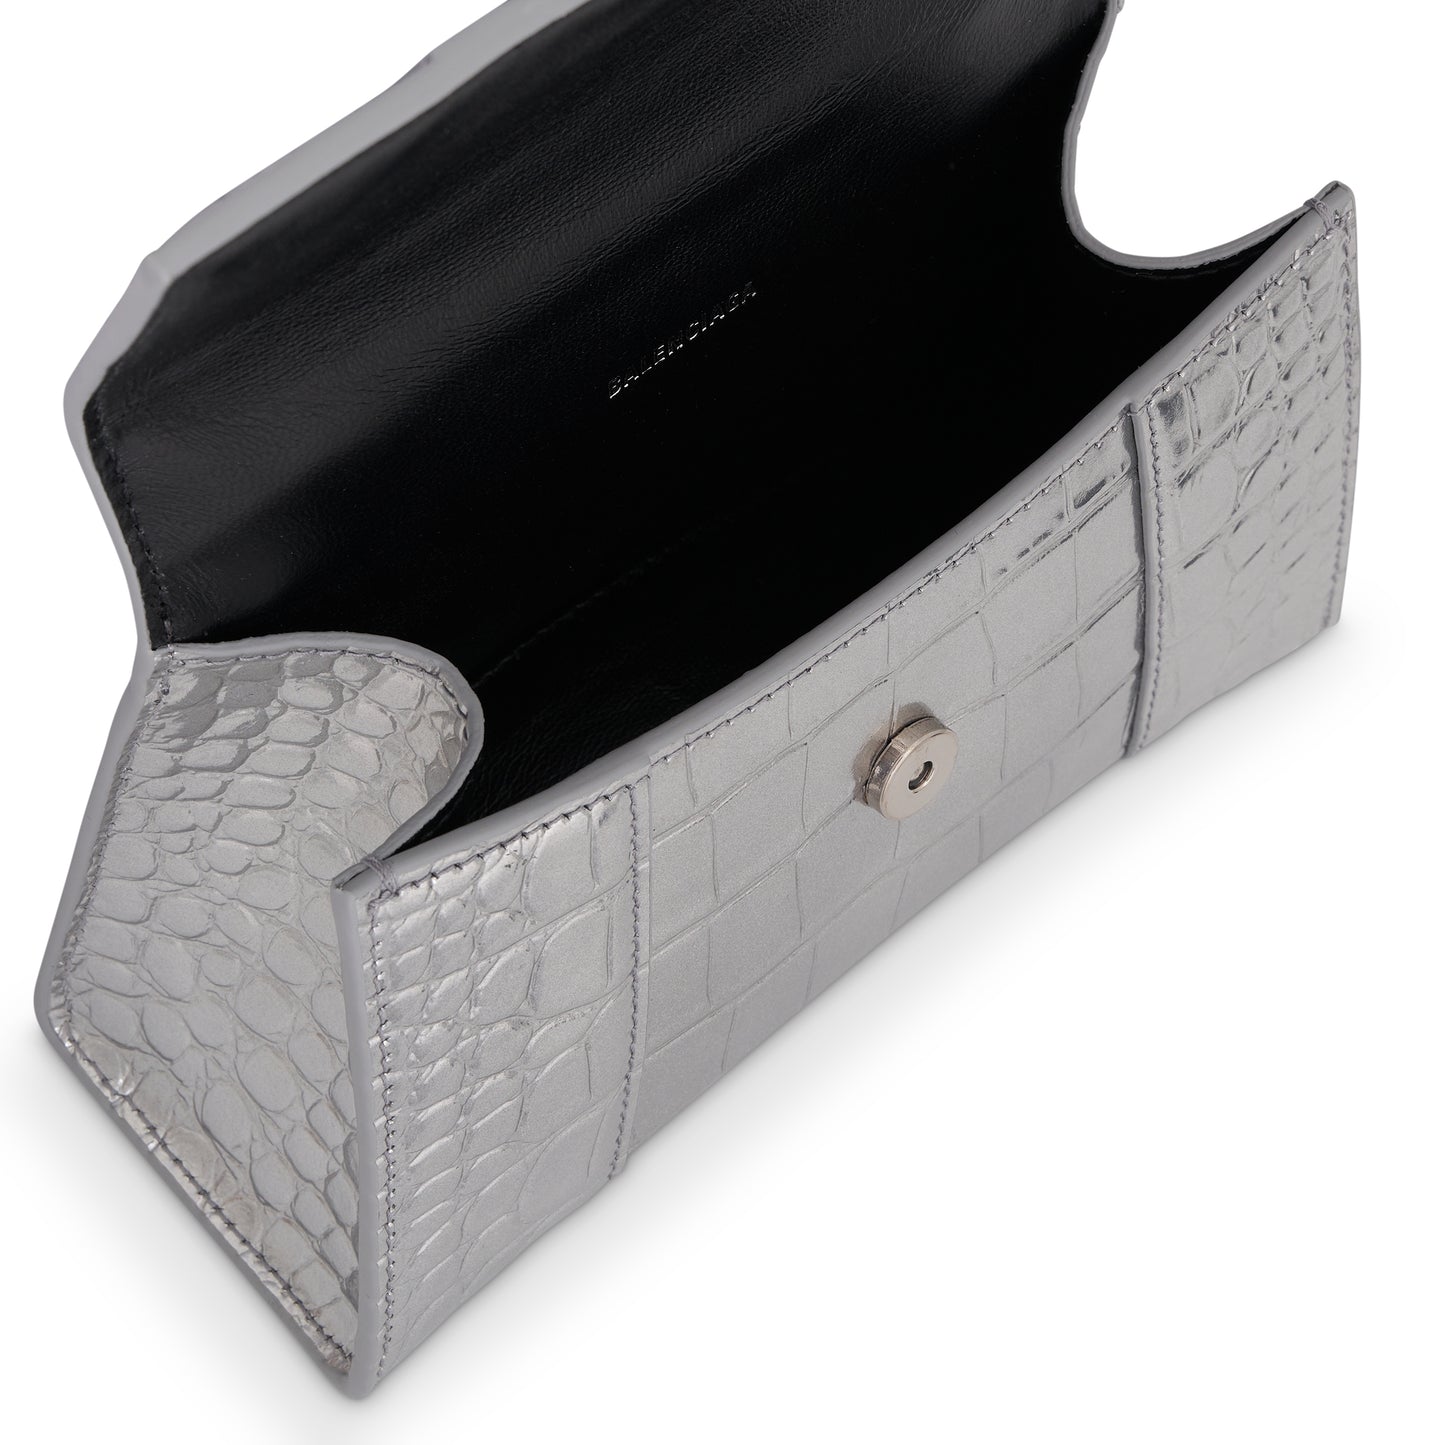 Hourglass XS Croco Embossed Bag in Silver